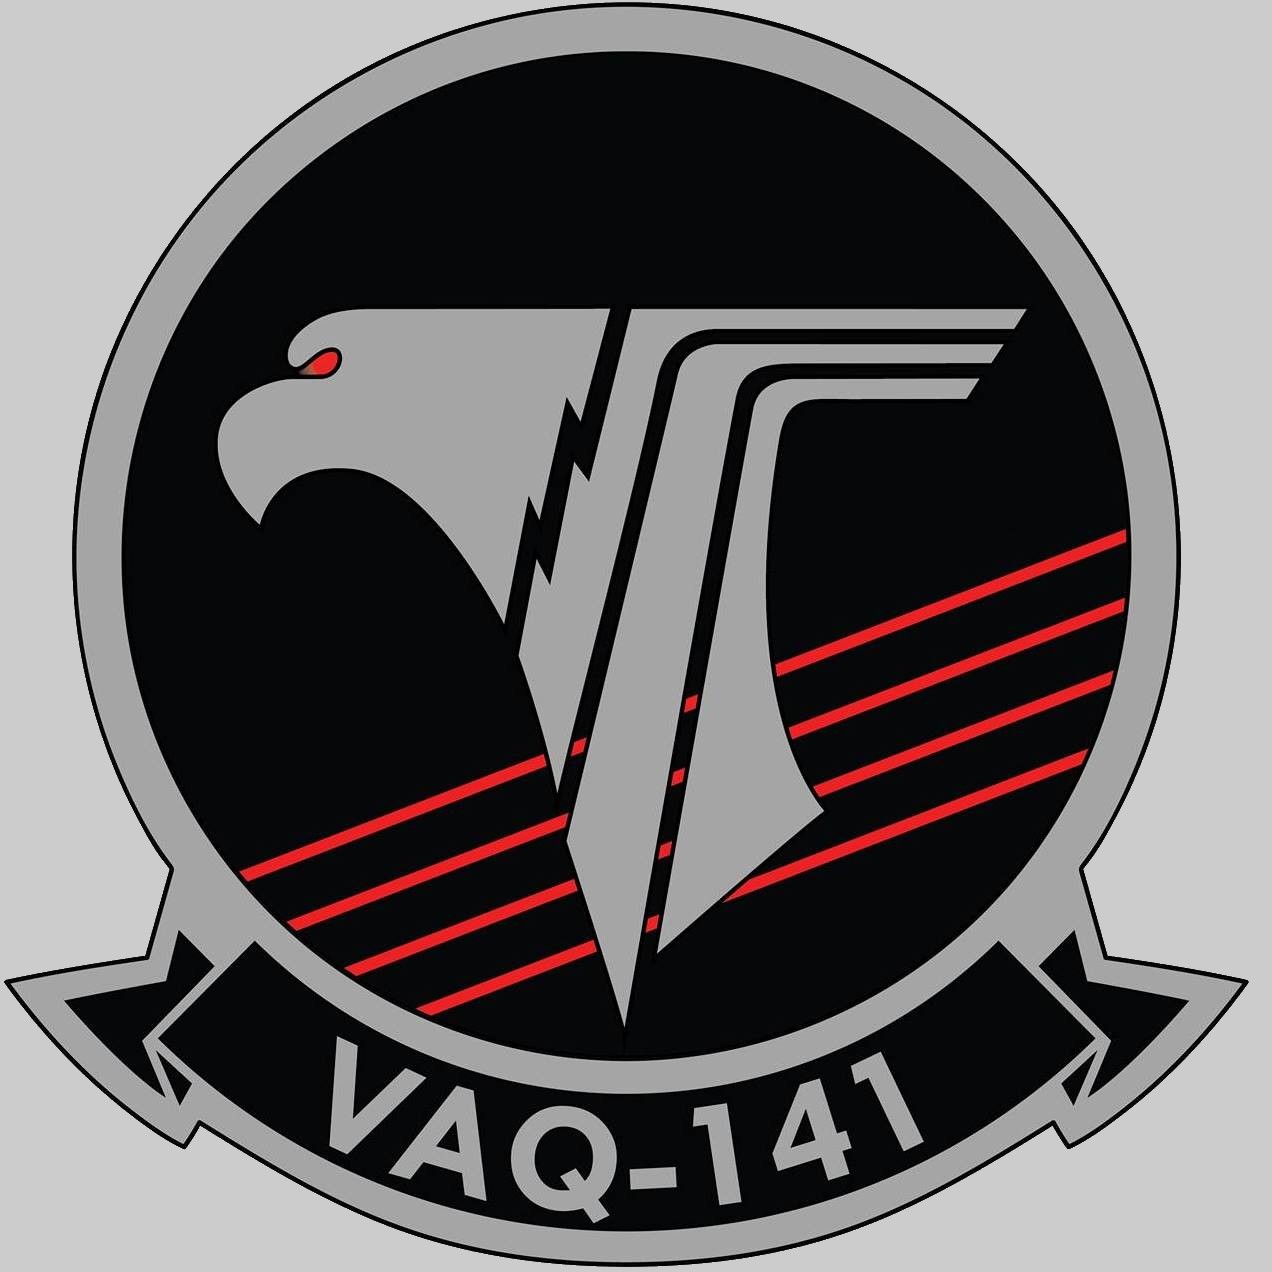 vaq-141 shadowhawks insignia crest patch badge electronic attack squadron ea-18g growler cvw-5 02x